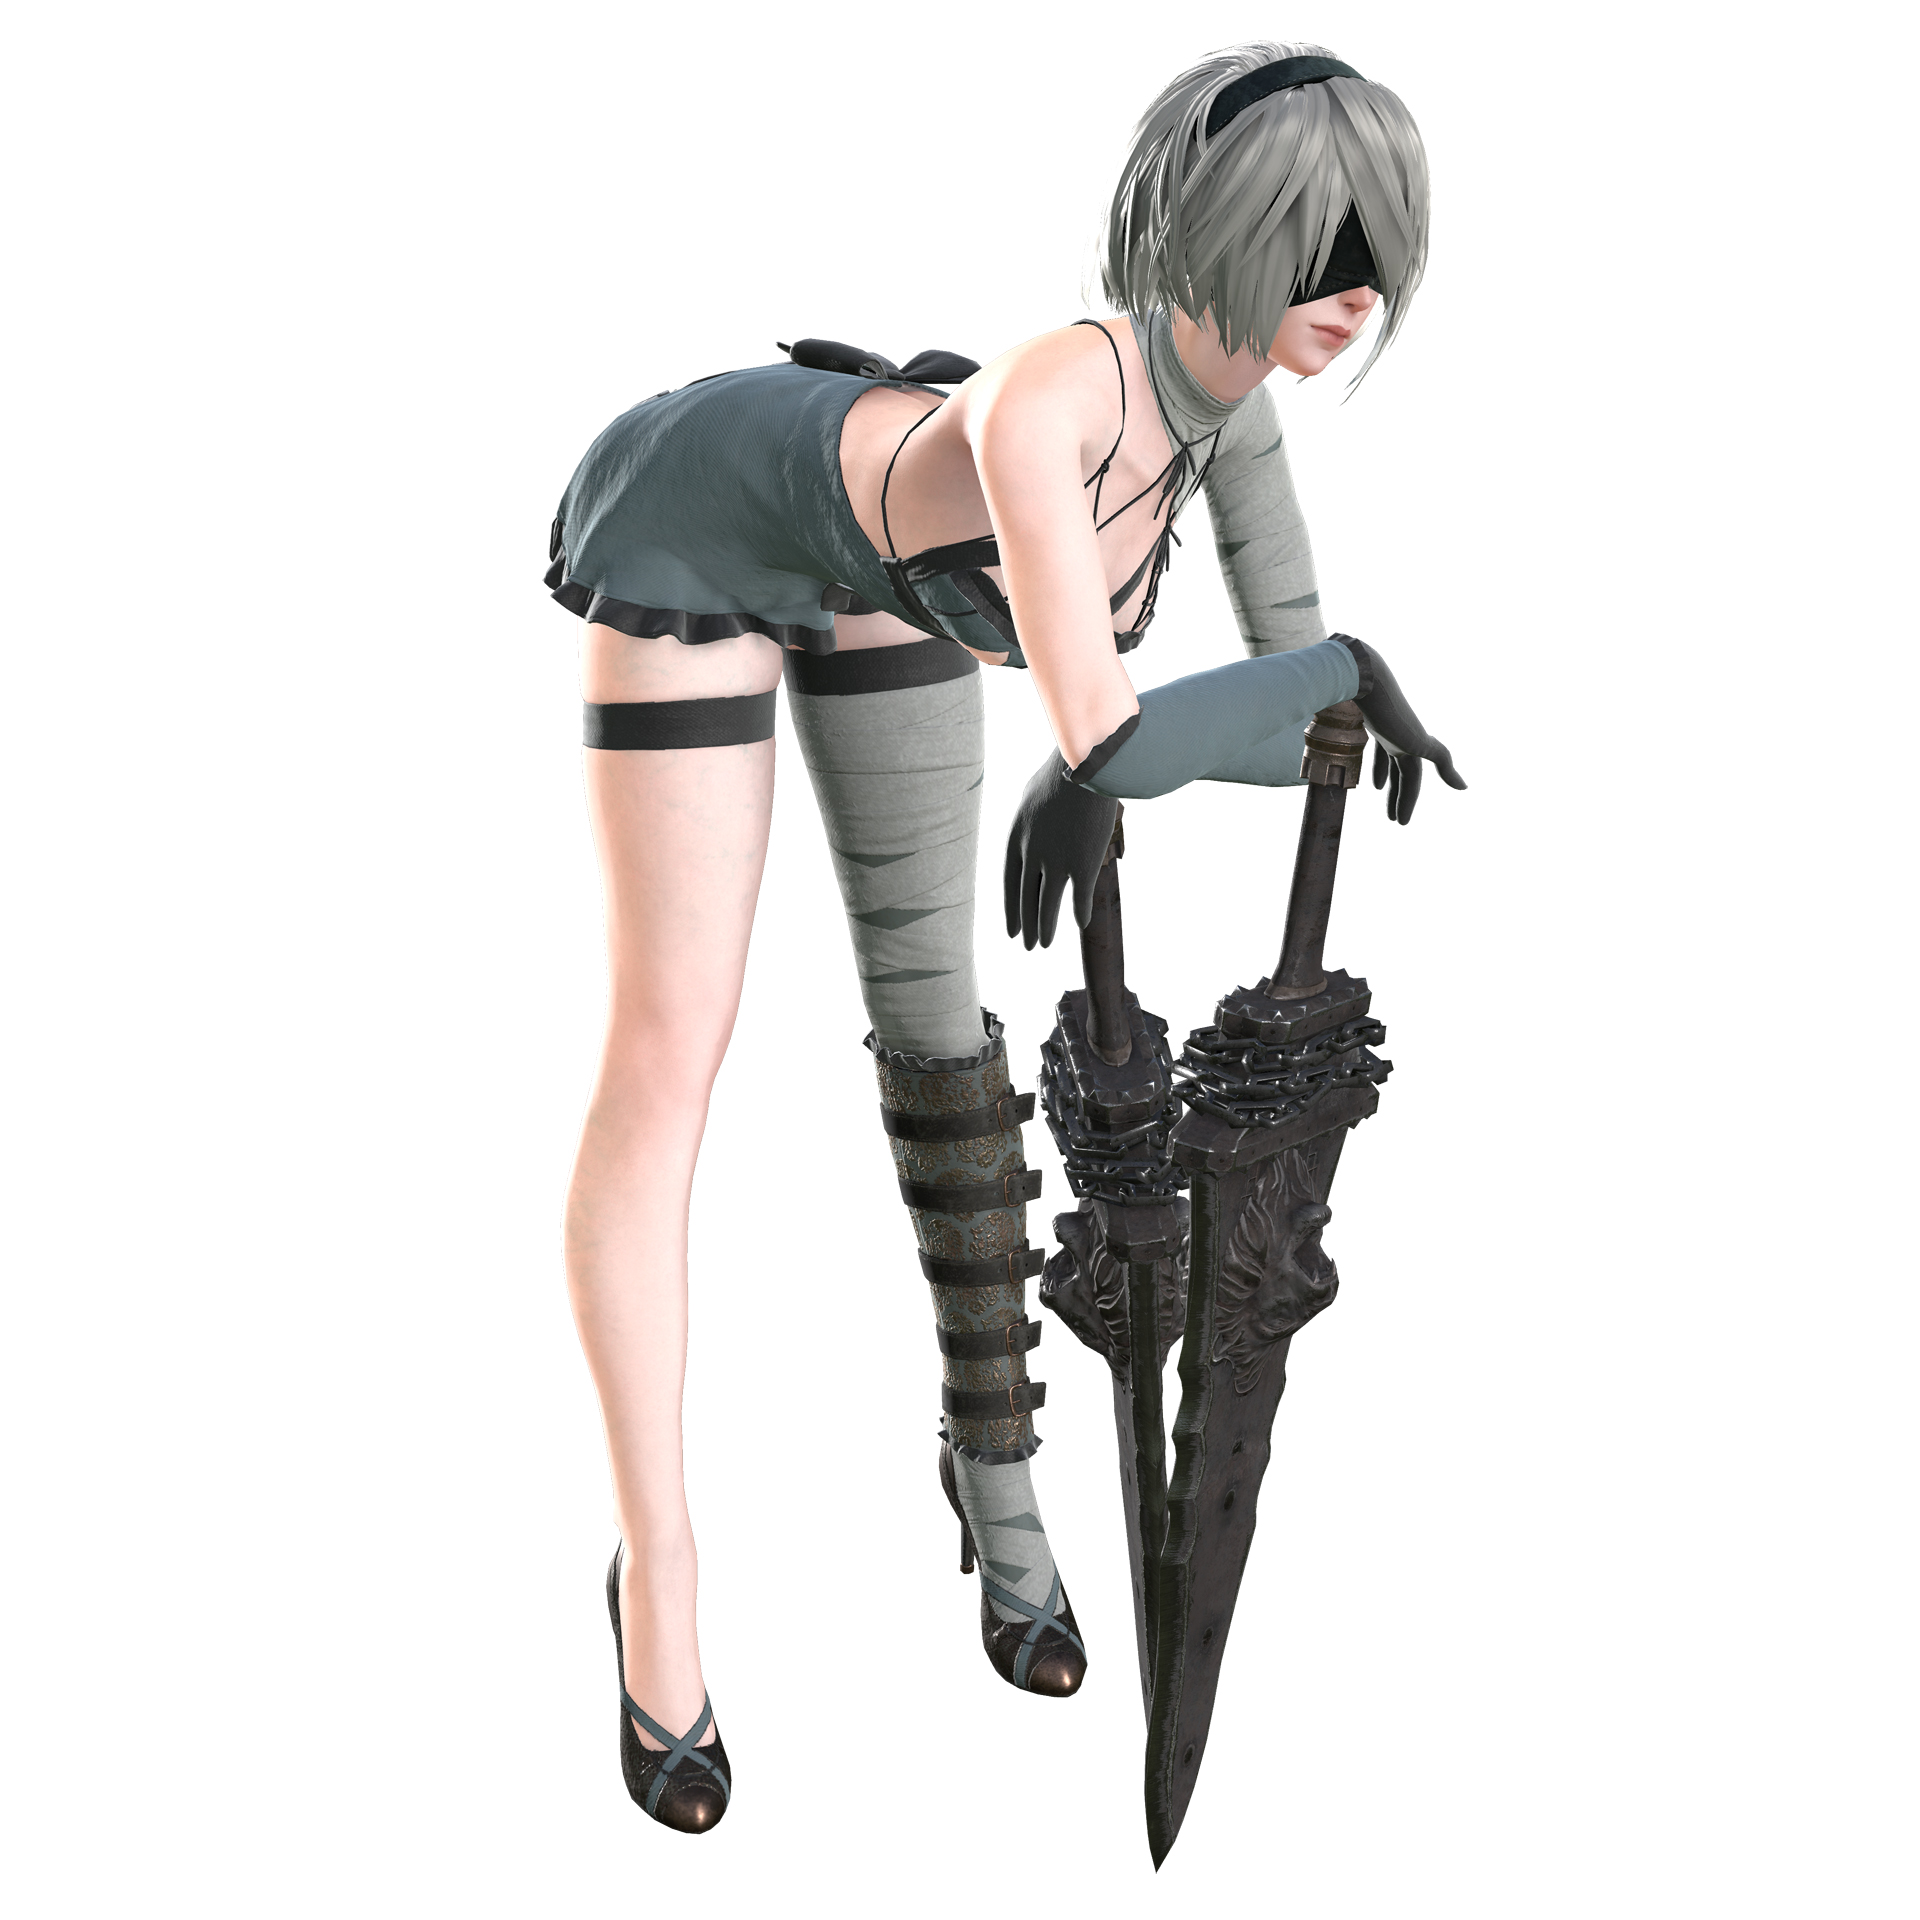 In the DLC for NieR: Automata, you can get an outfit for 2B which looks alm...